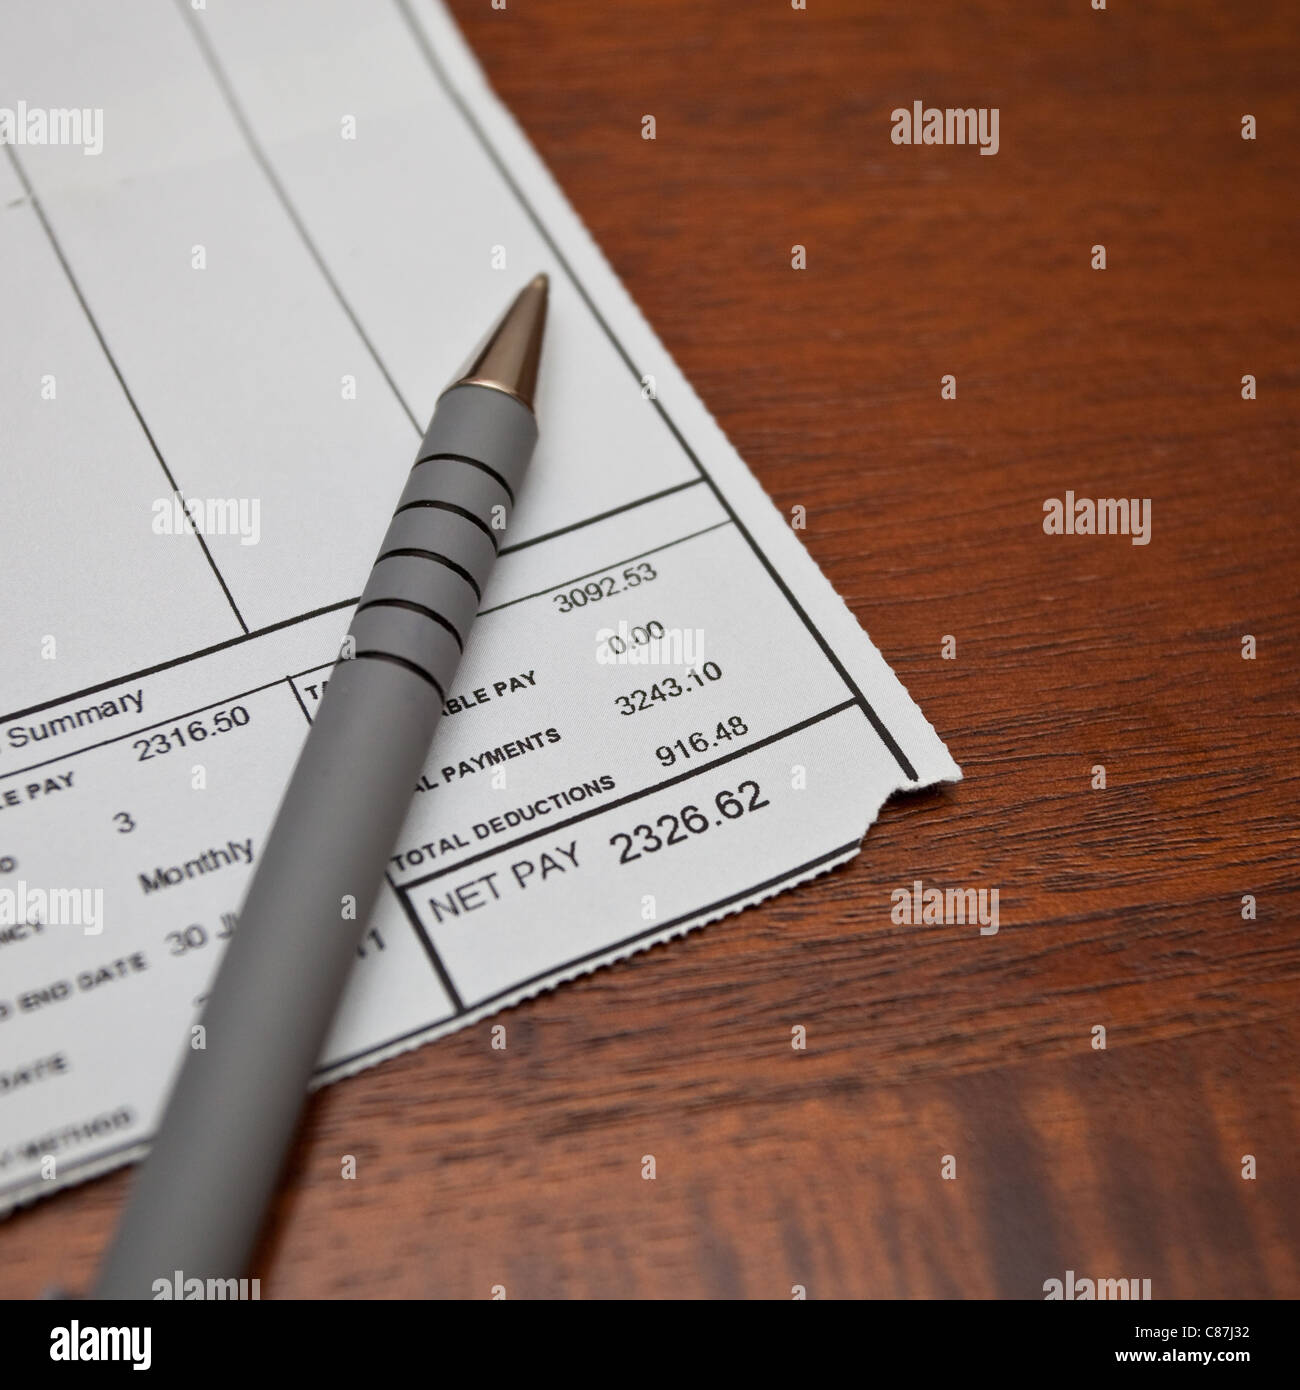 A typical payslip/pay check showing deductions due to tax and national insurance, UK, 2011 Stock Photo